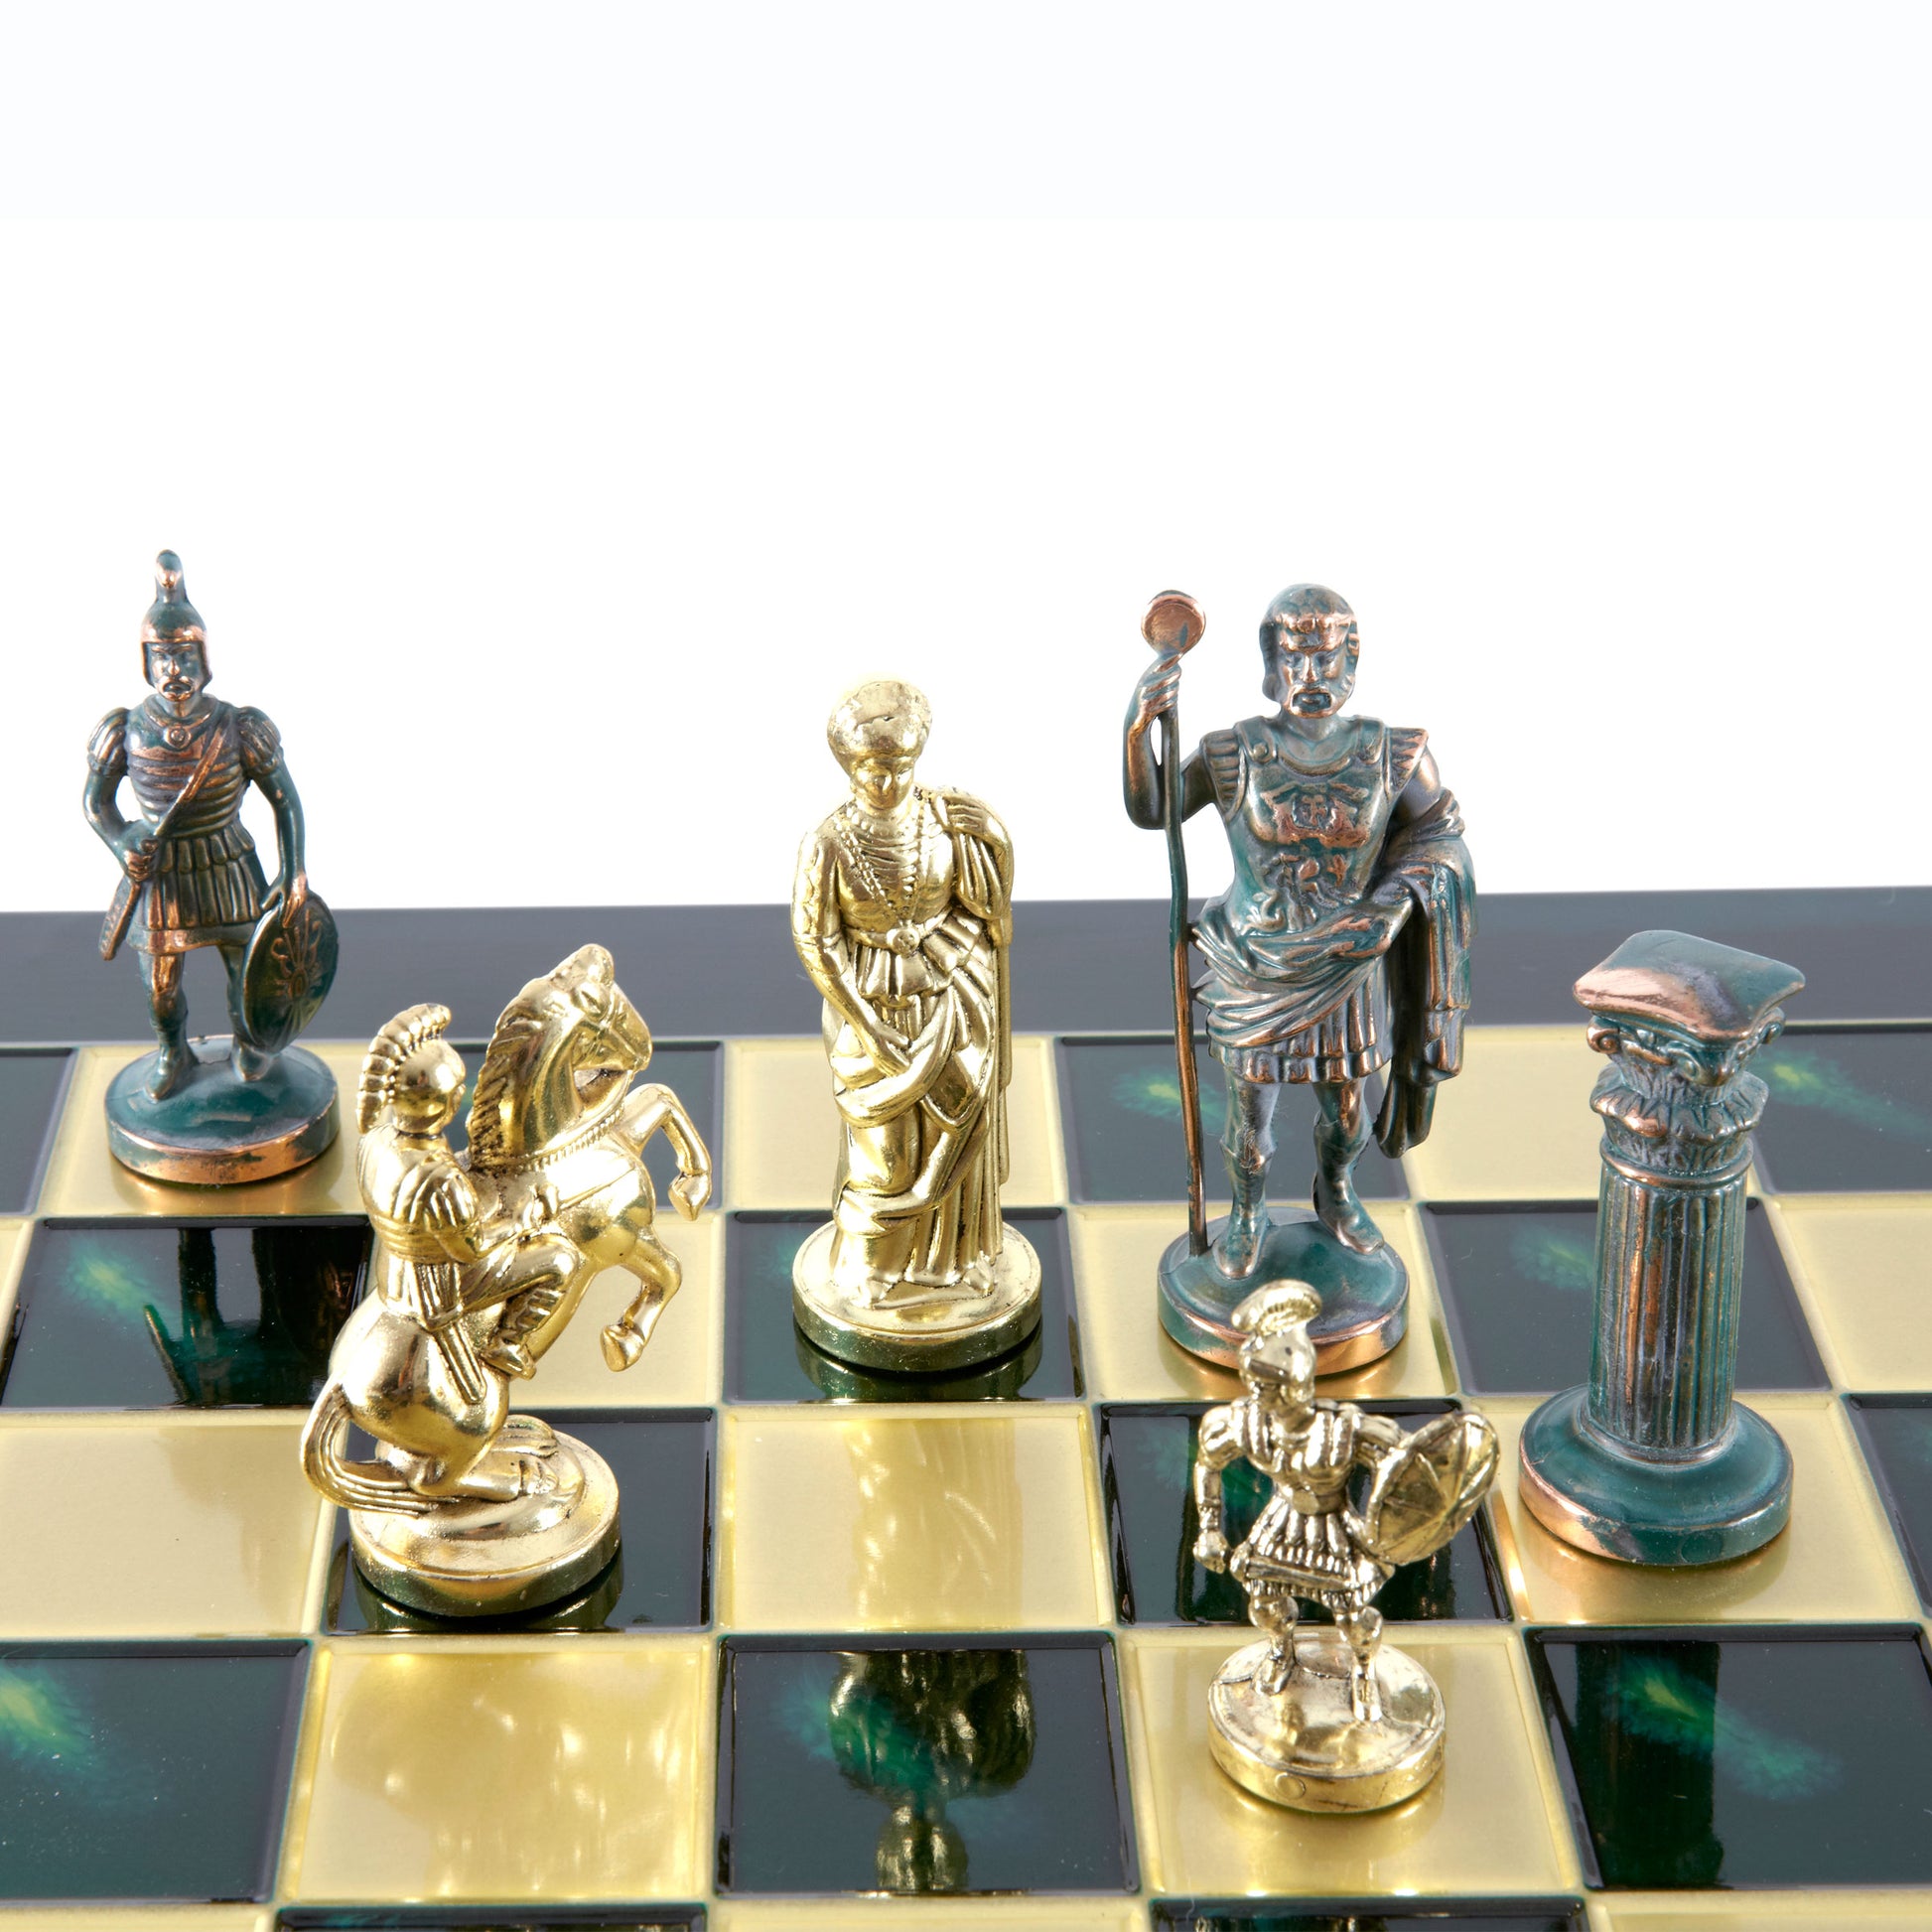 GREEK ROMAN PERIOD CHESS SET with gold/green chessmen and bronze chessboard 44 x 44cm (Large) - Premium Chess from MANOPOULOS Chess & Backgammon - Just €275! Shop now at MANOPOULOS Chess & Backgammon